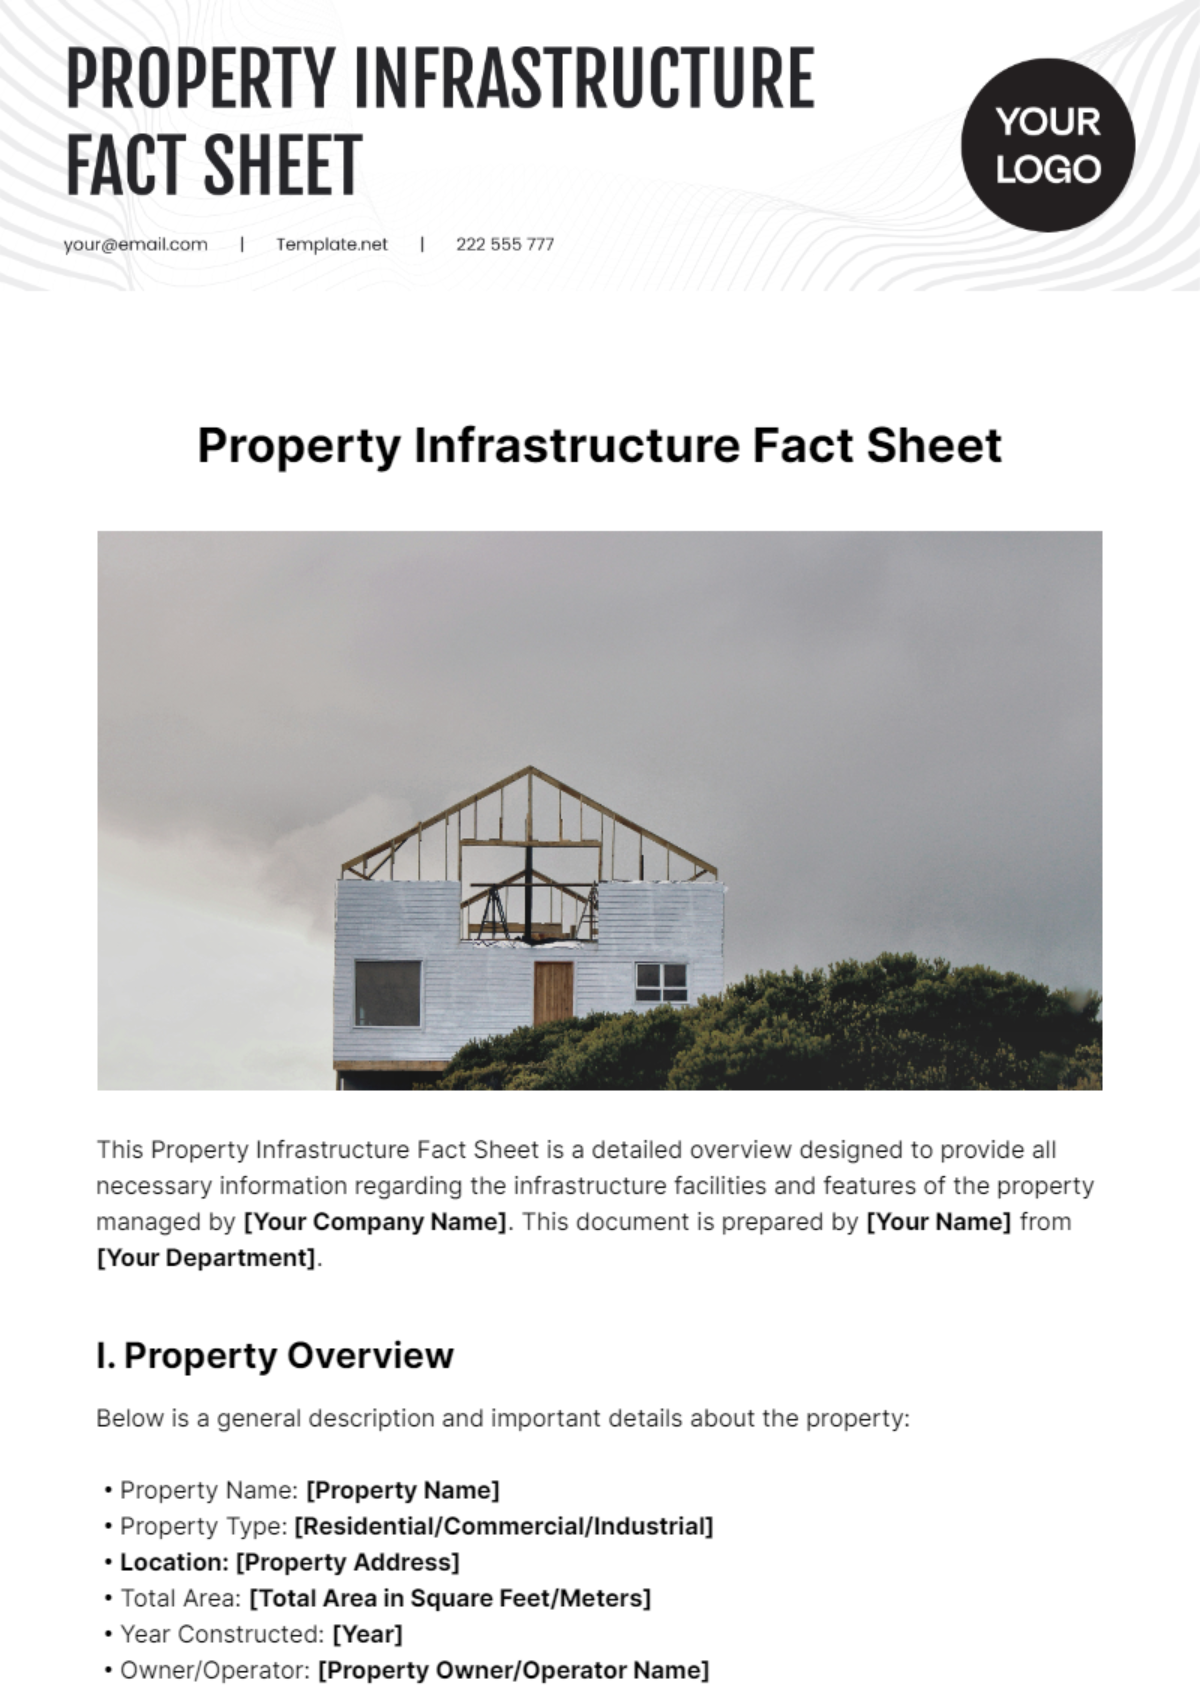 Property Infrastructure Fact Sheet Template